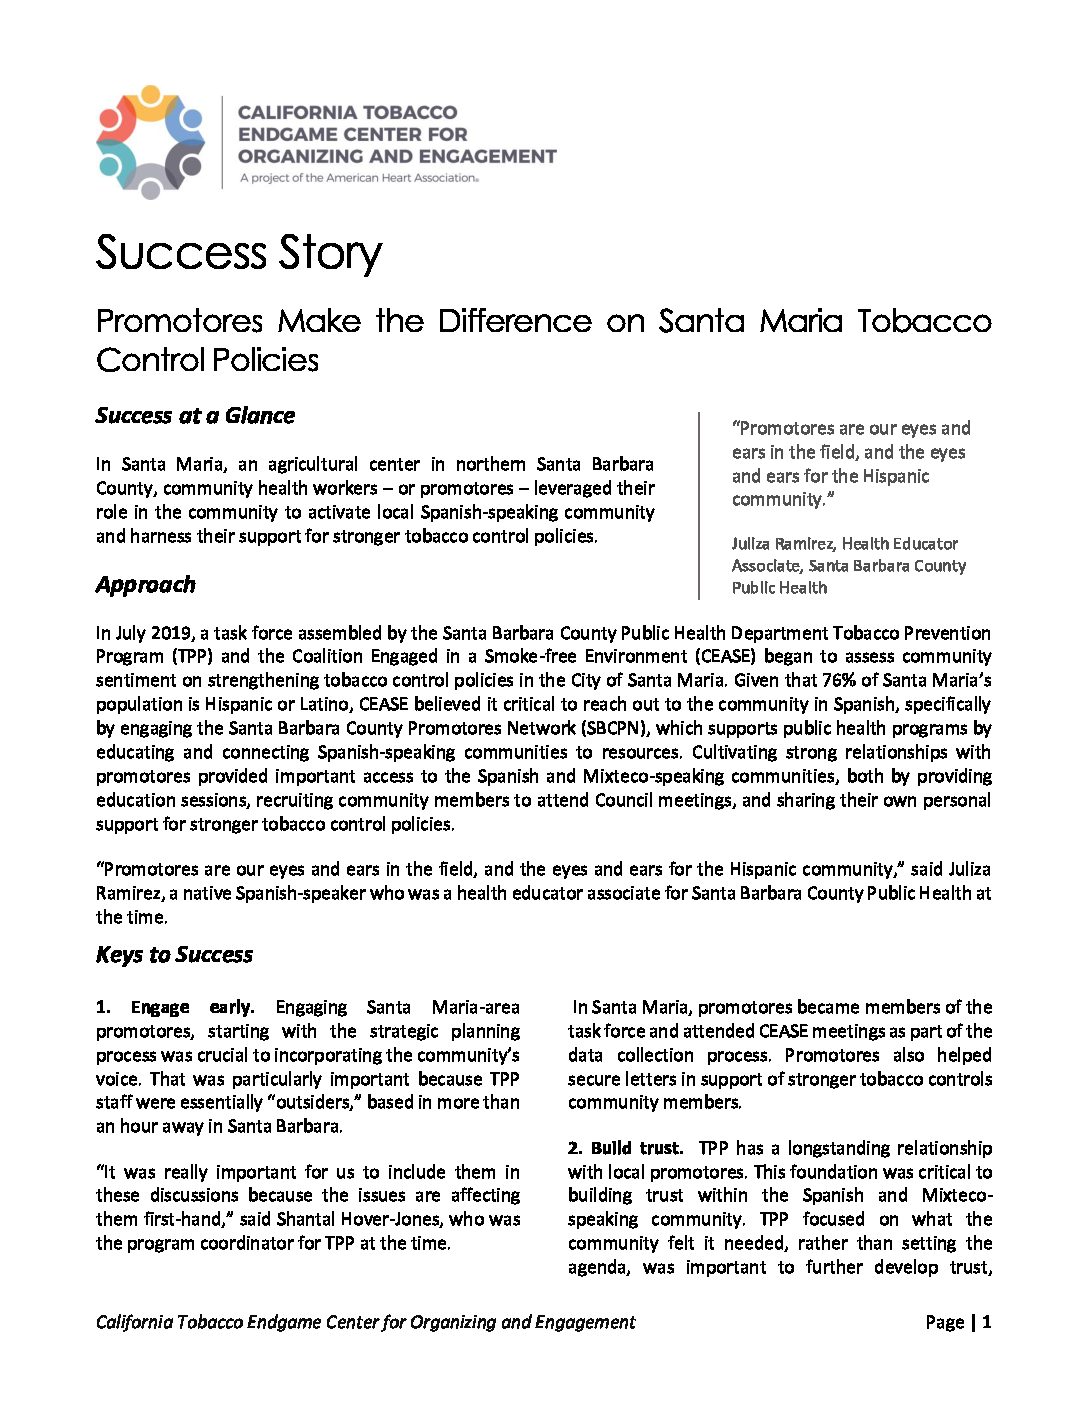 In Santa Maria, an agricultural center in northern Santa Barbara County, community health workers – or promotores – leveraged their role in the community to activate local Spanish-speaking community and harness their support for stronger tobacco control policies.  